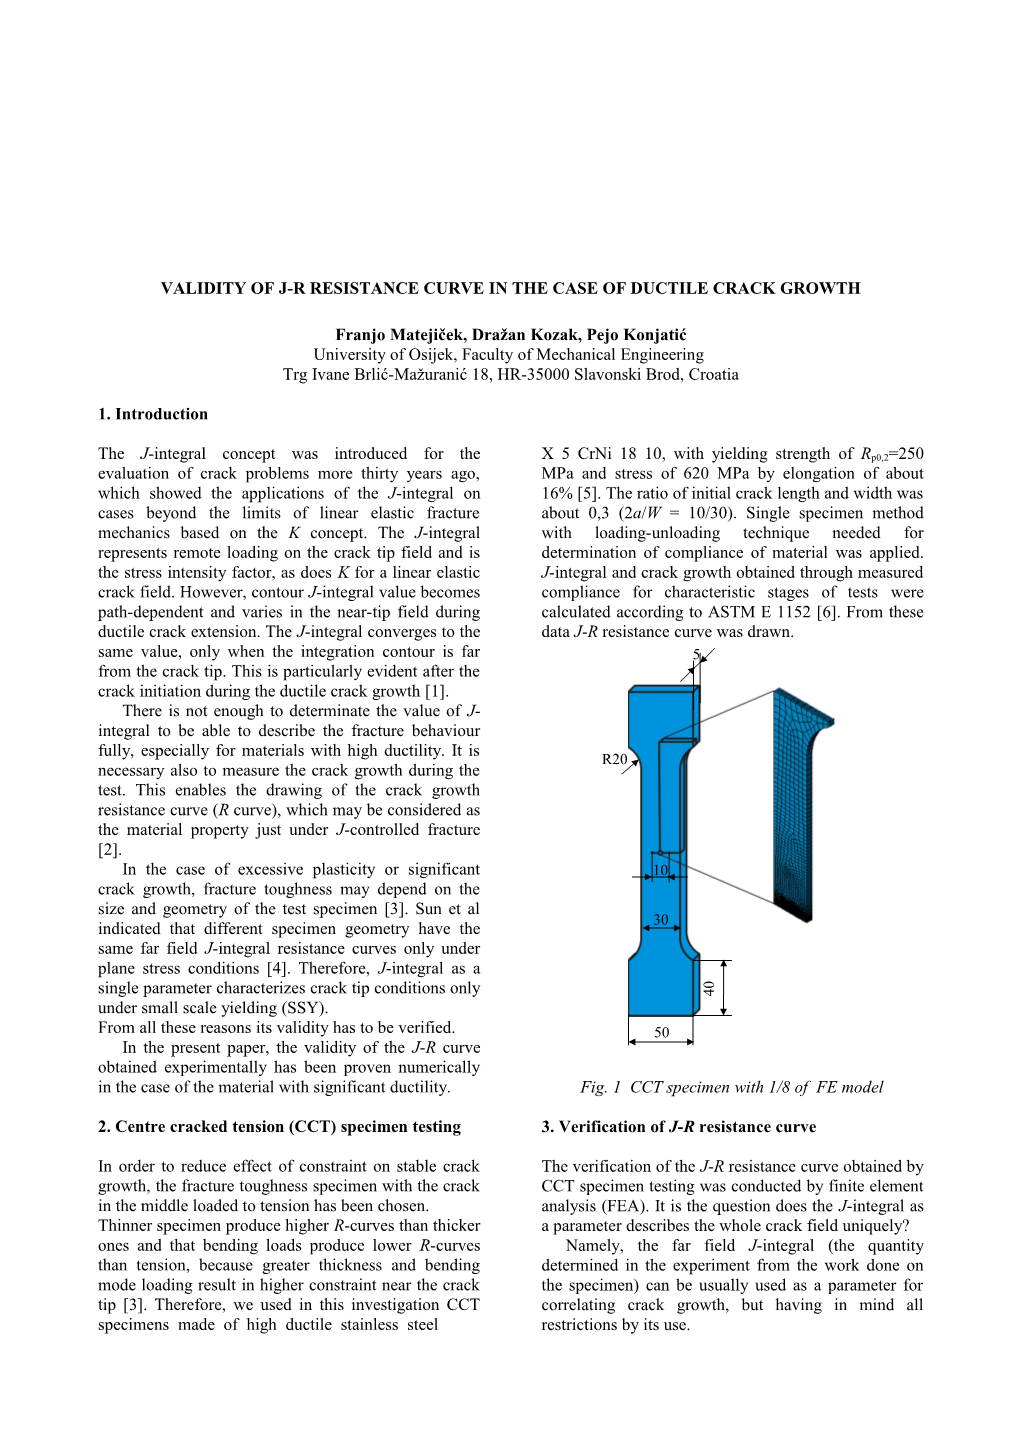 Validity of J-R Resistancee Curve in the Case of Ductile Crack Growth